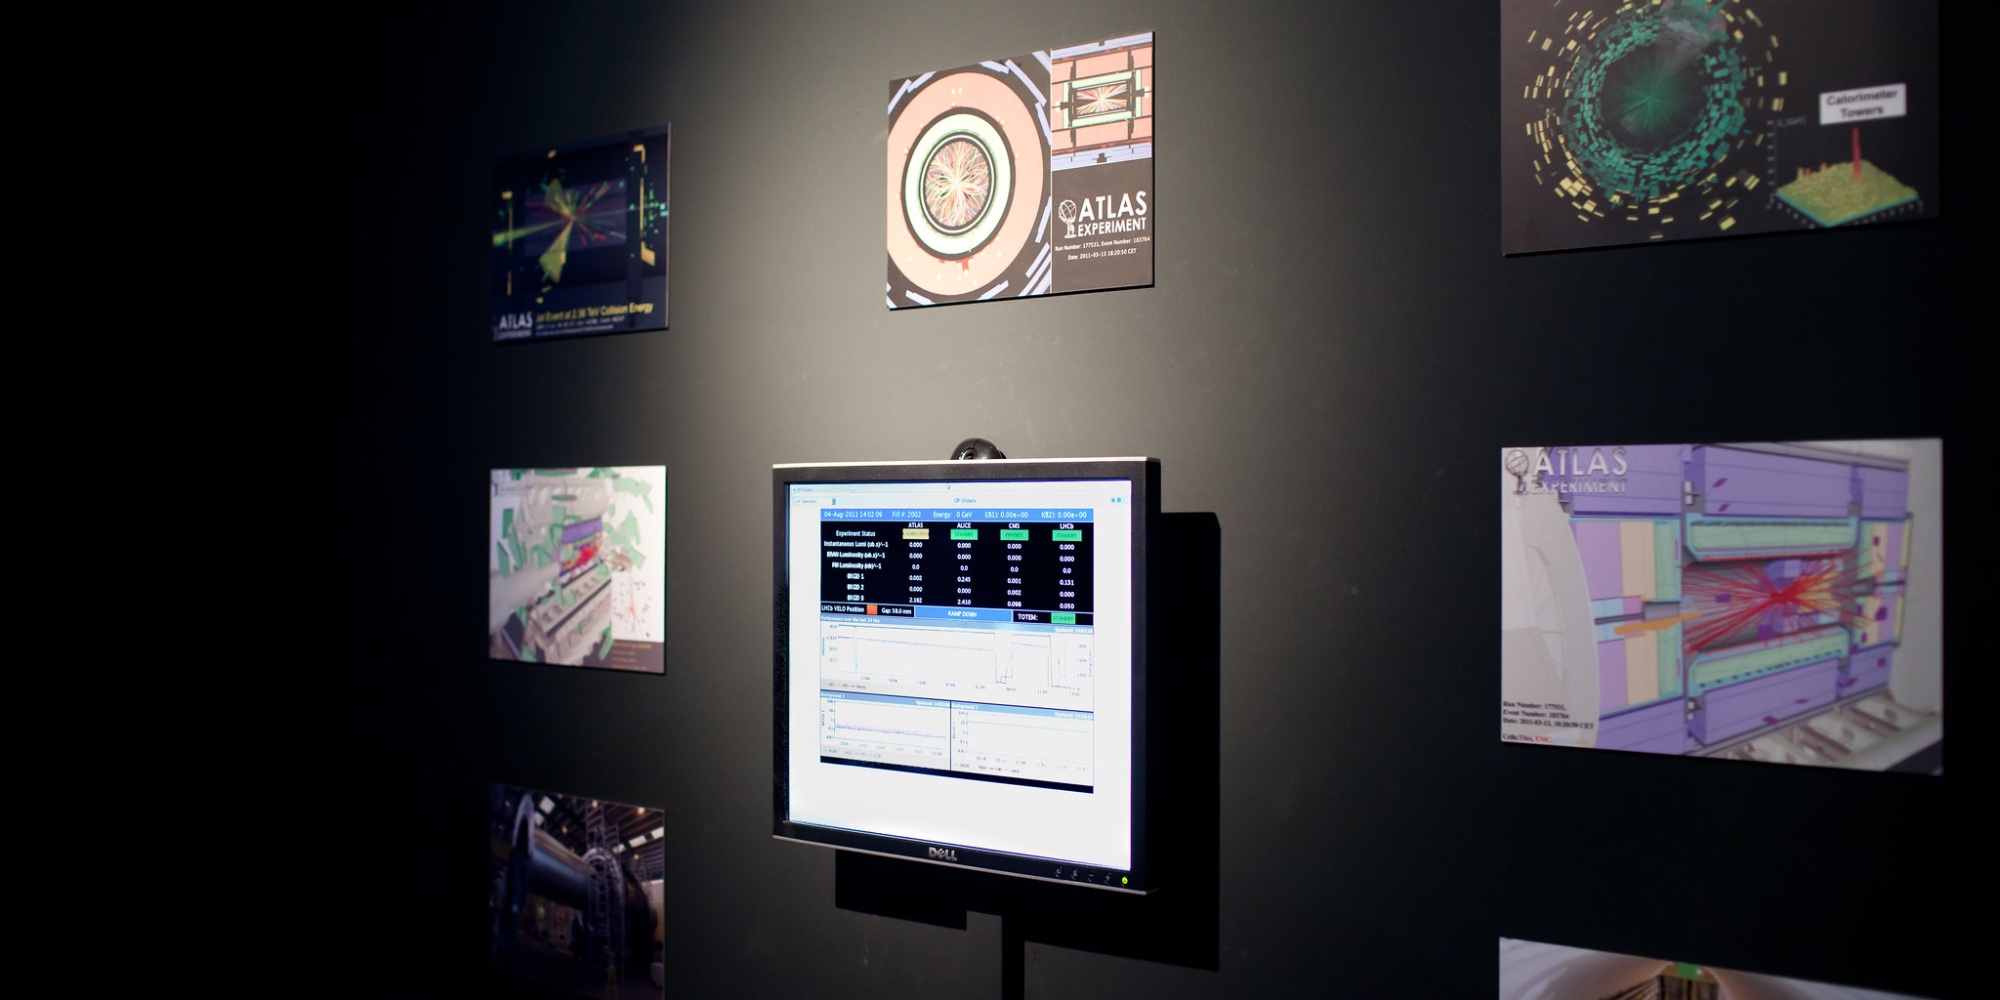 Exhibition at the Ars Electronica Center